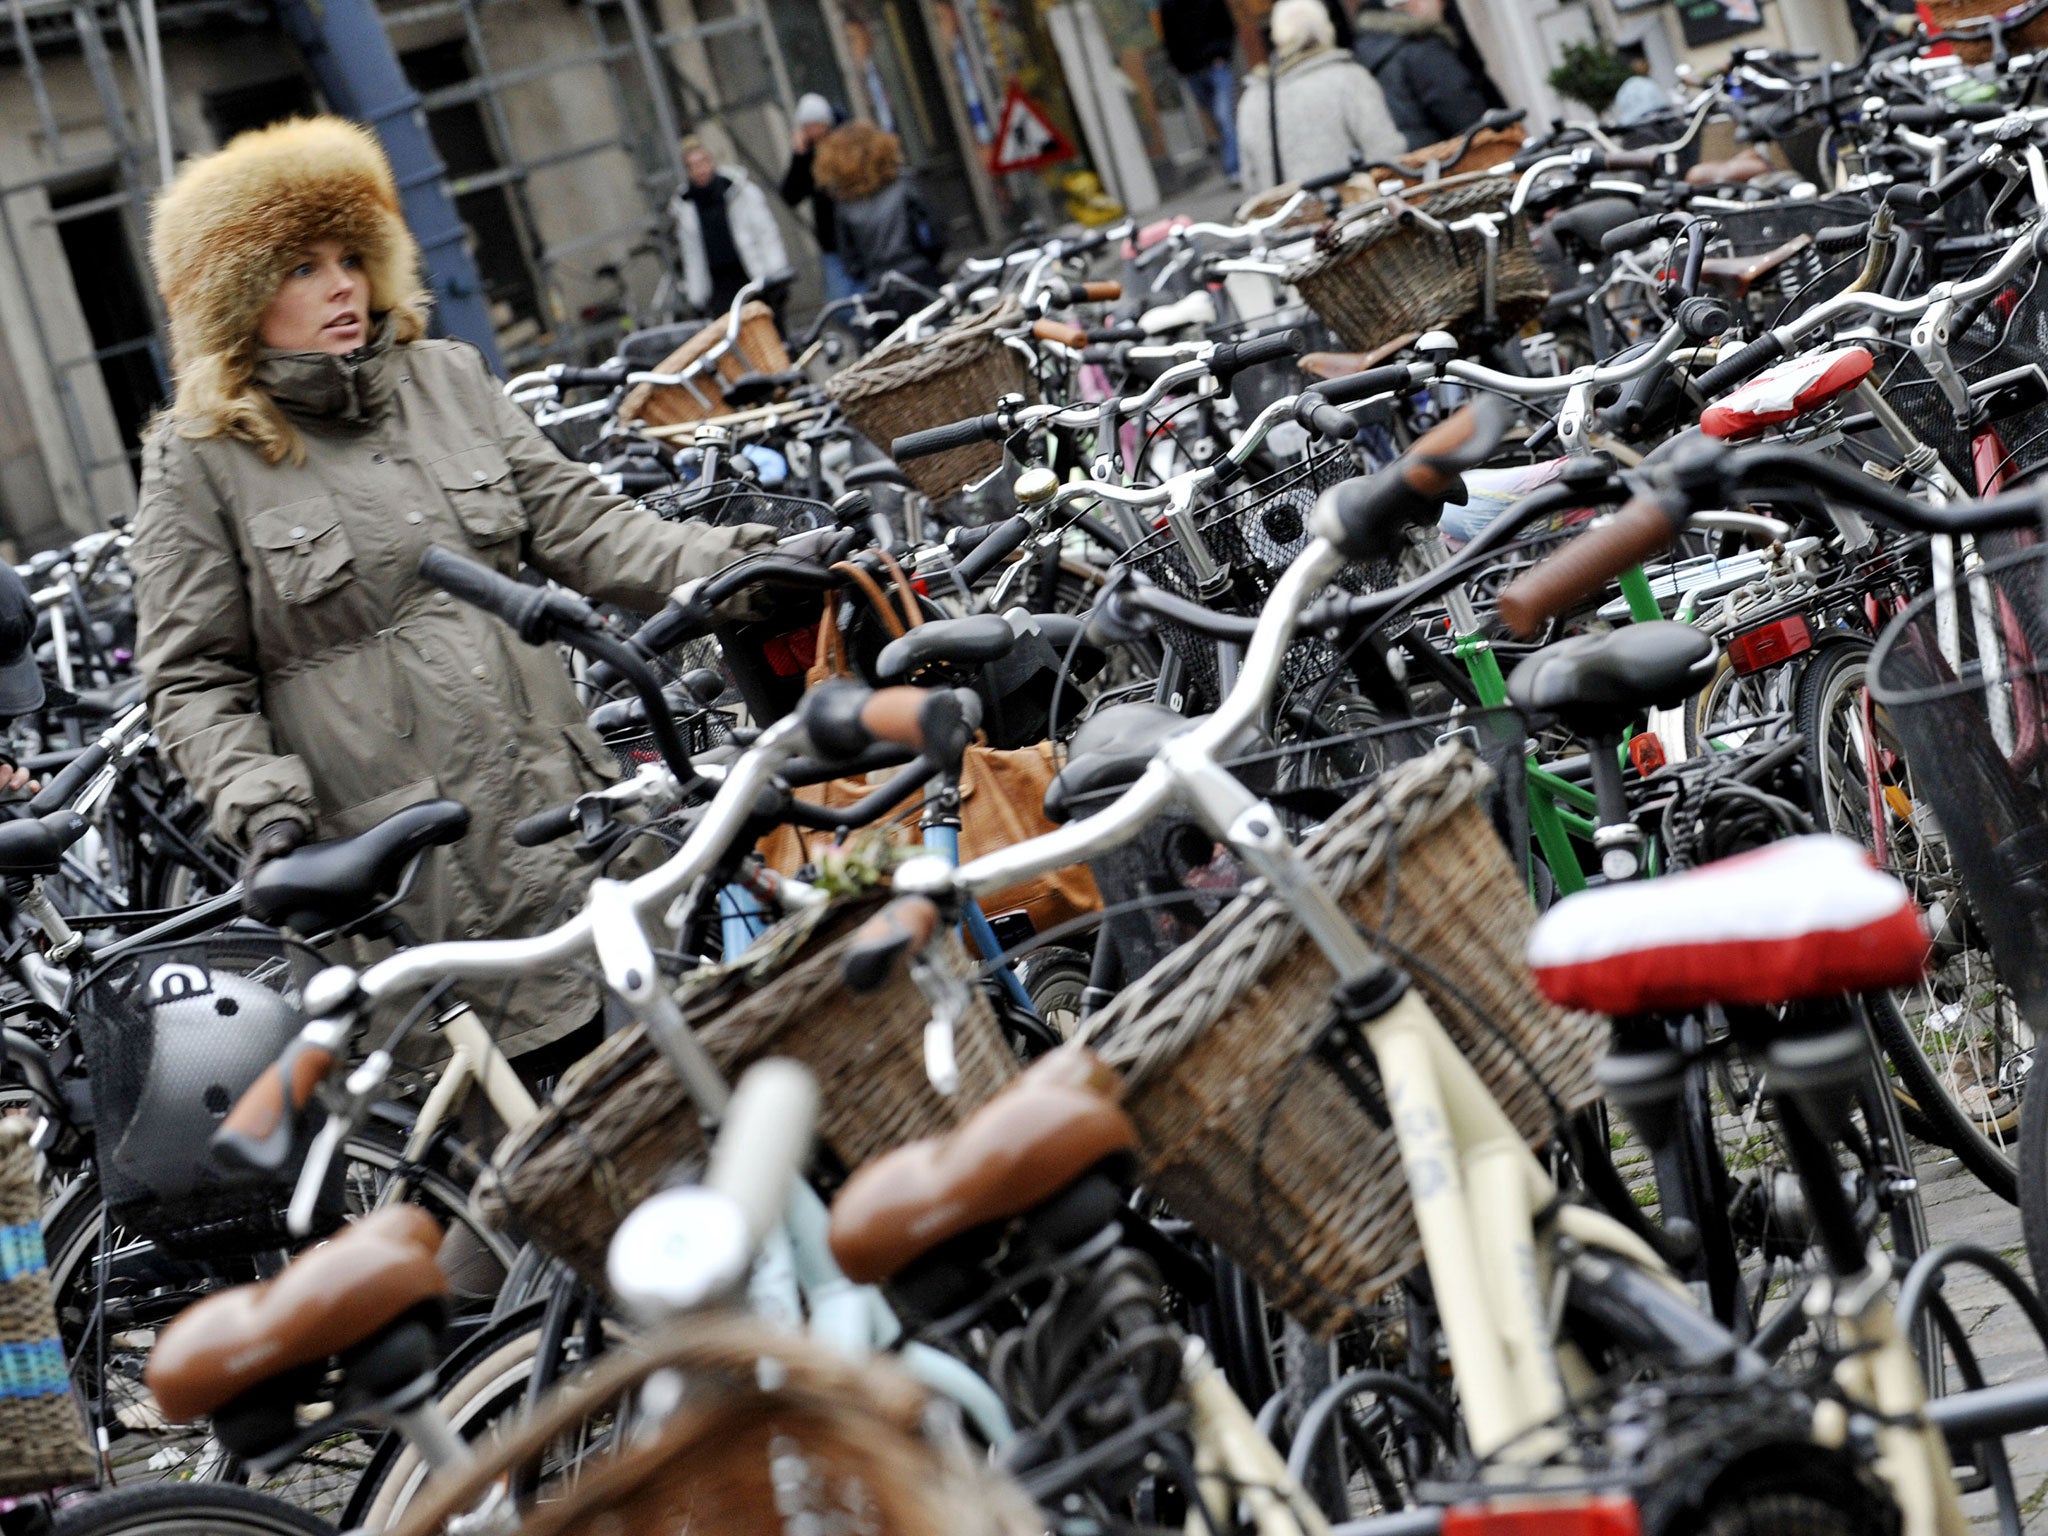 Hamburg is planning to ban all cars from its centre over the next 20 years and put thousands of commuters on bikes